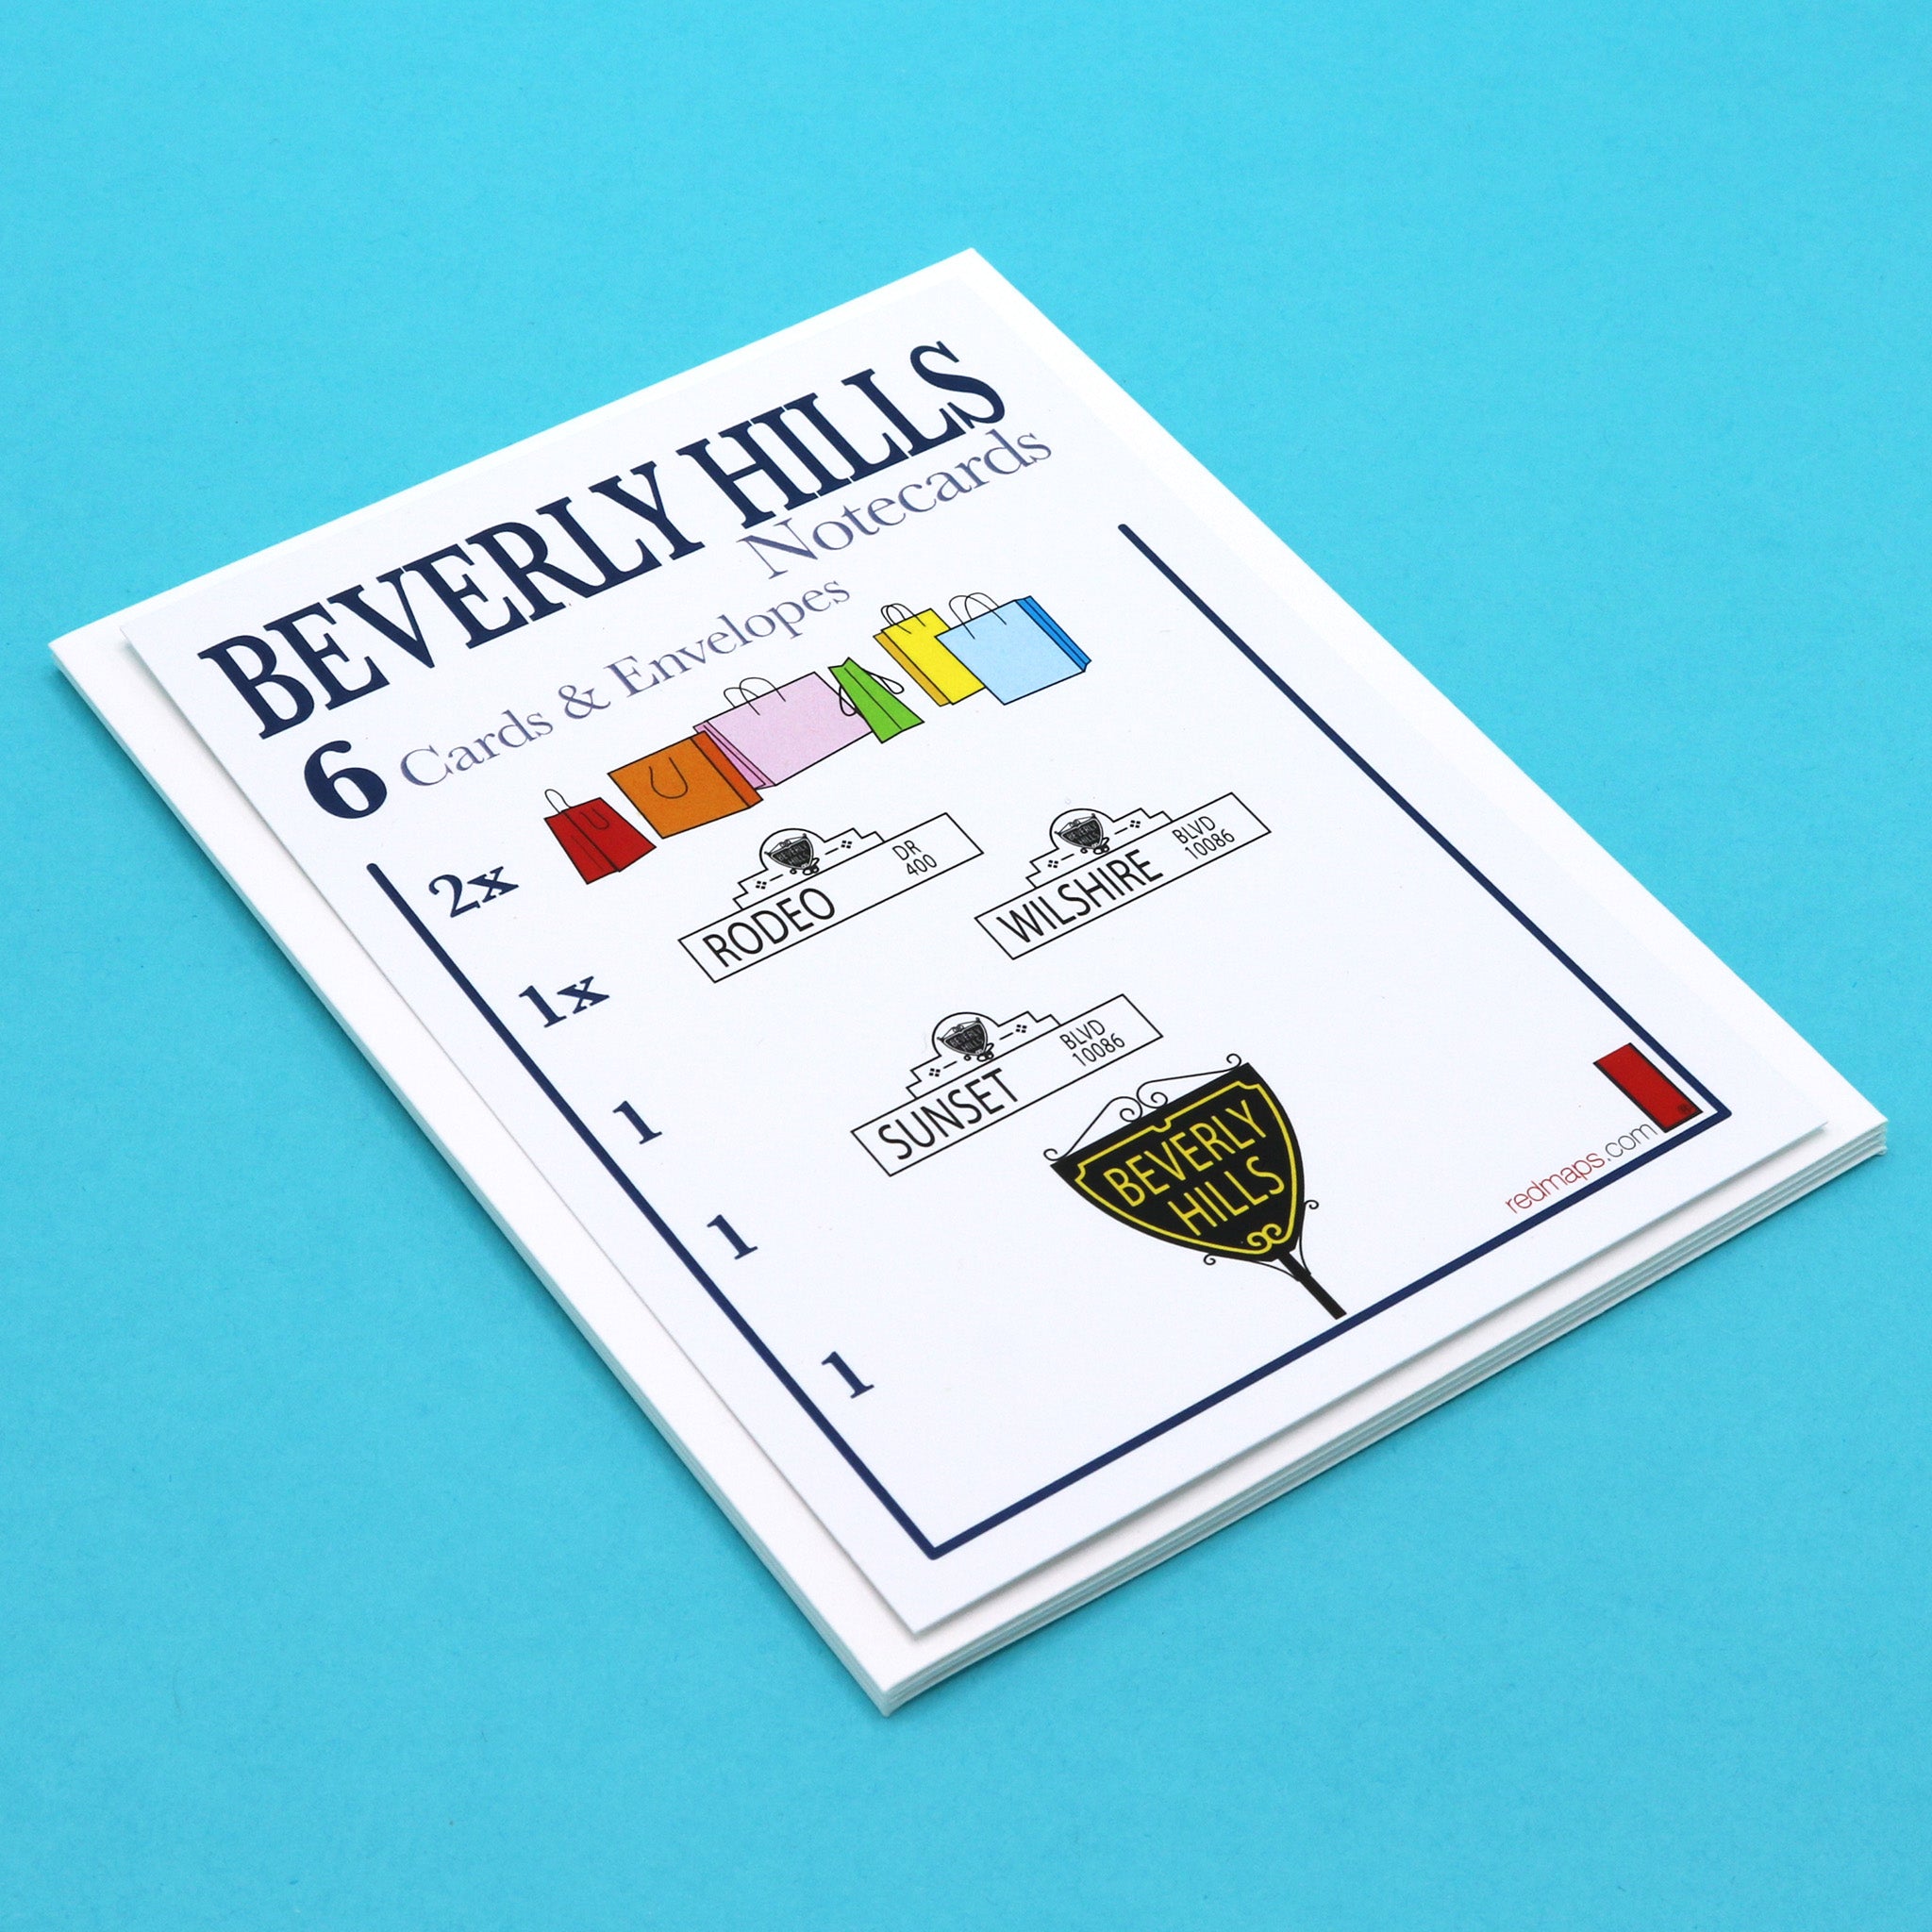 Set of notecards with illustrations of famous Beverly Hills streets and shopping bags.